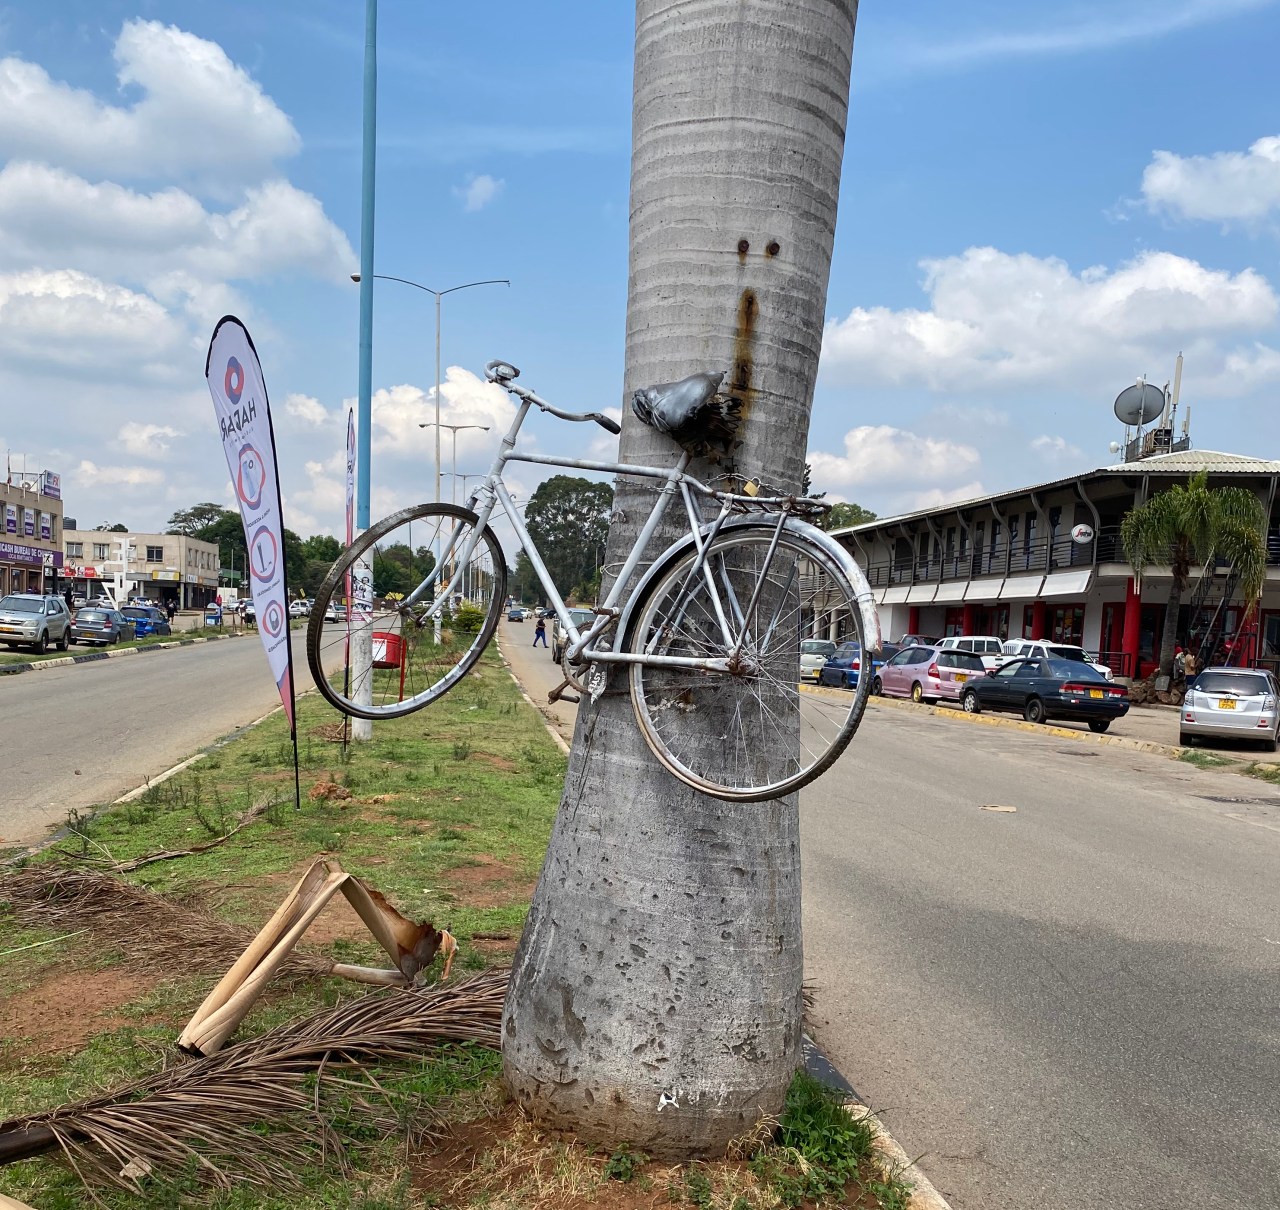 Ghost bikes are universal. Harare, Zimbabwe. Photo by Melanie Curry/Streetsblog